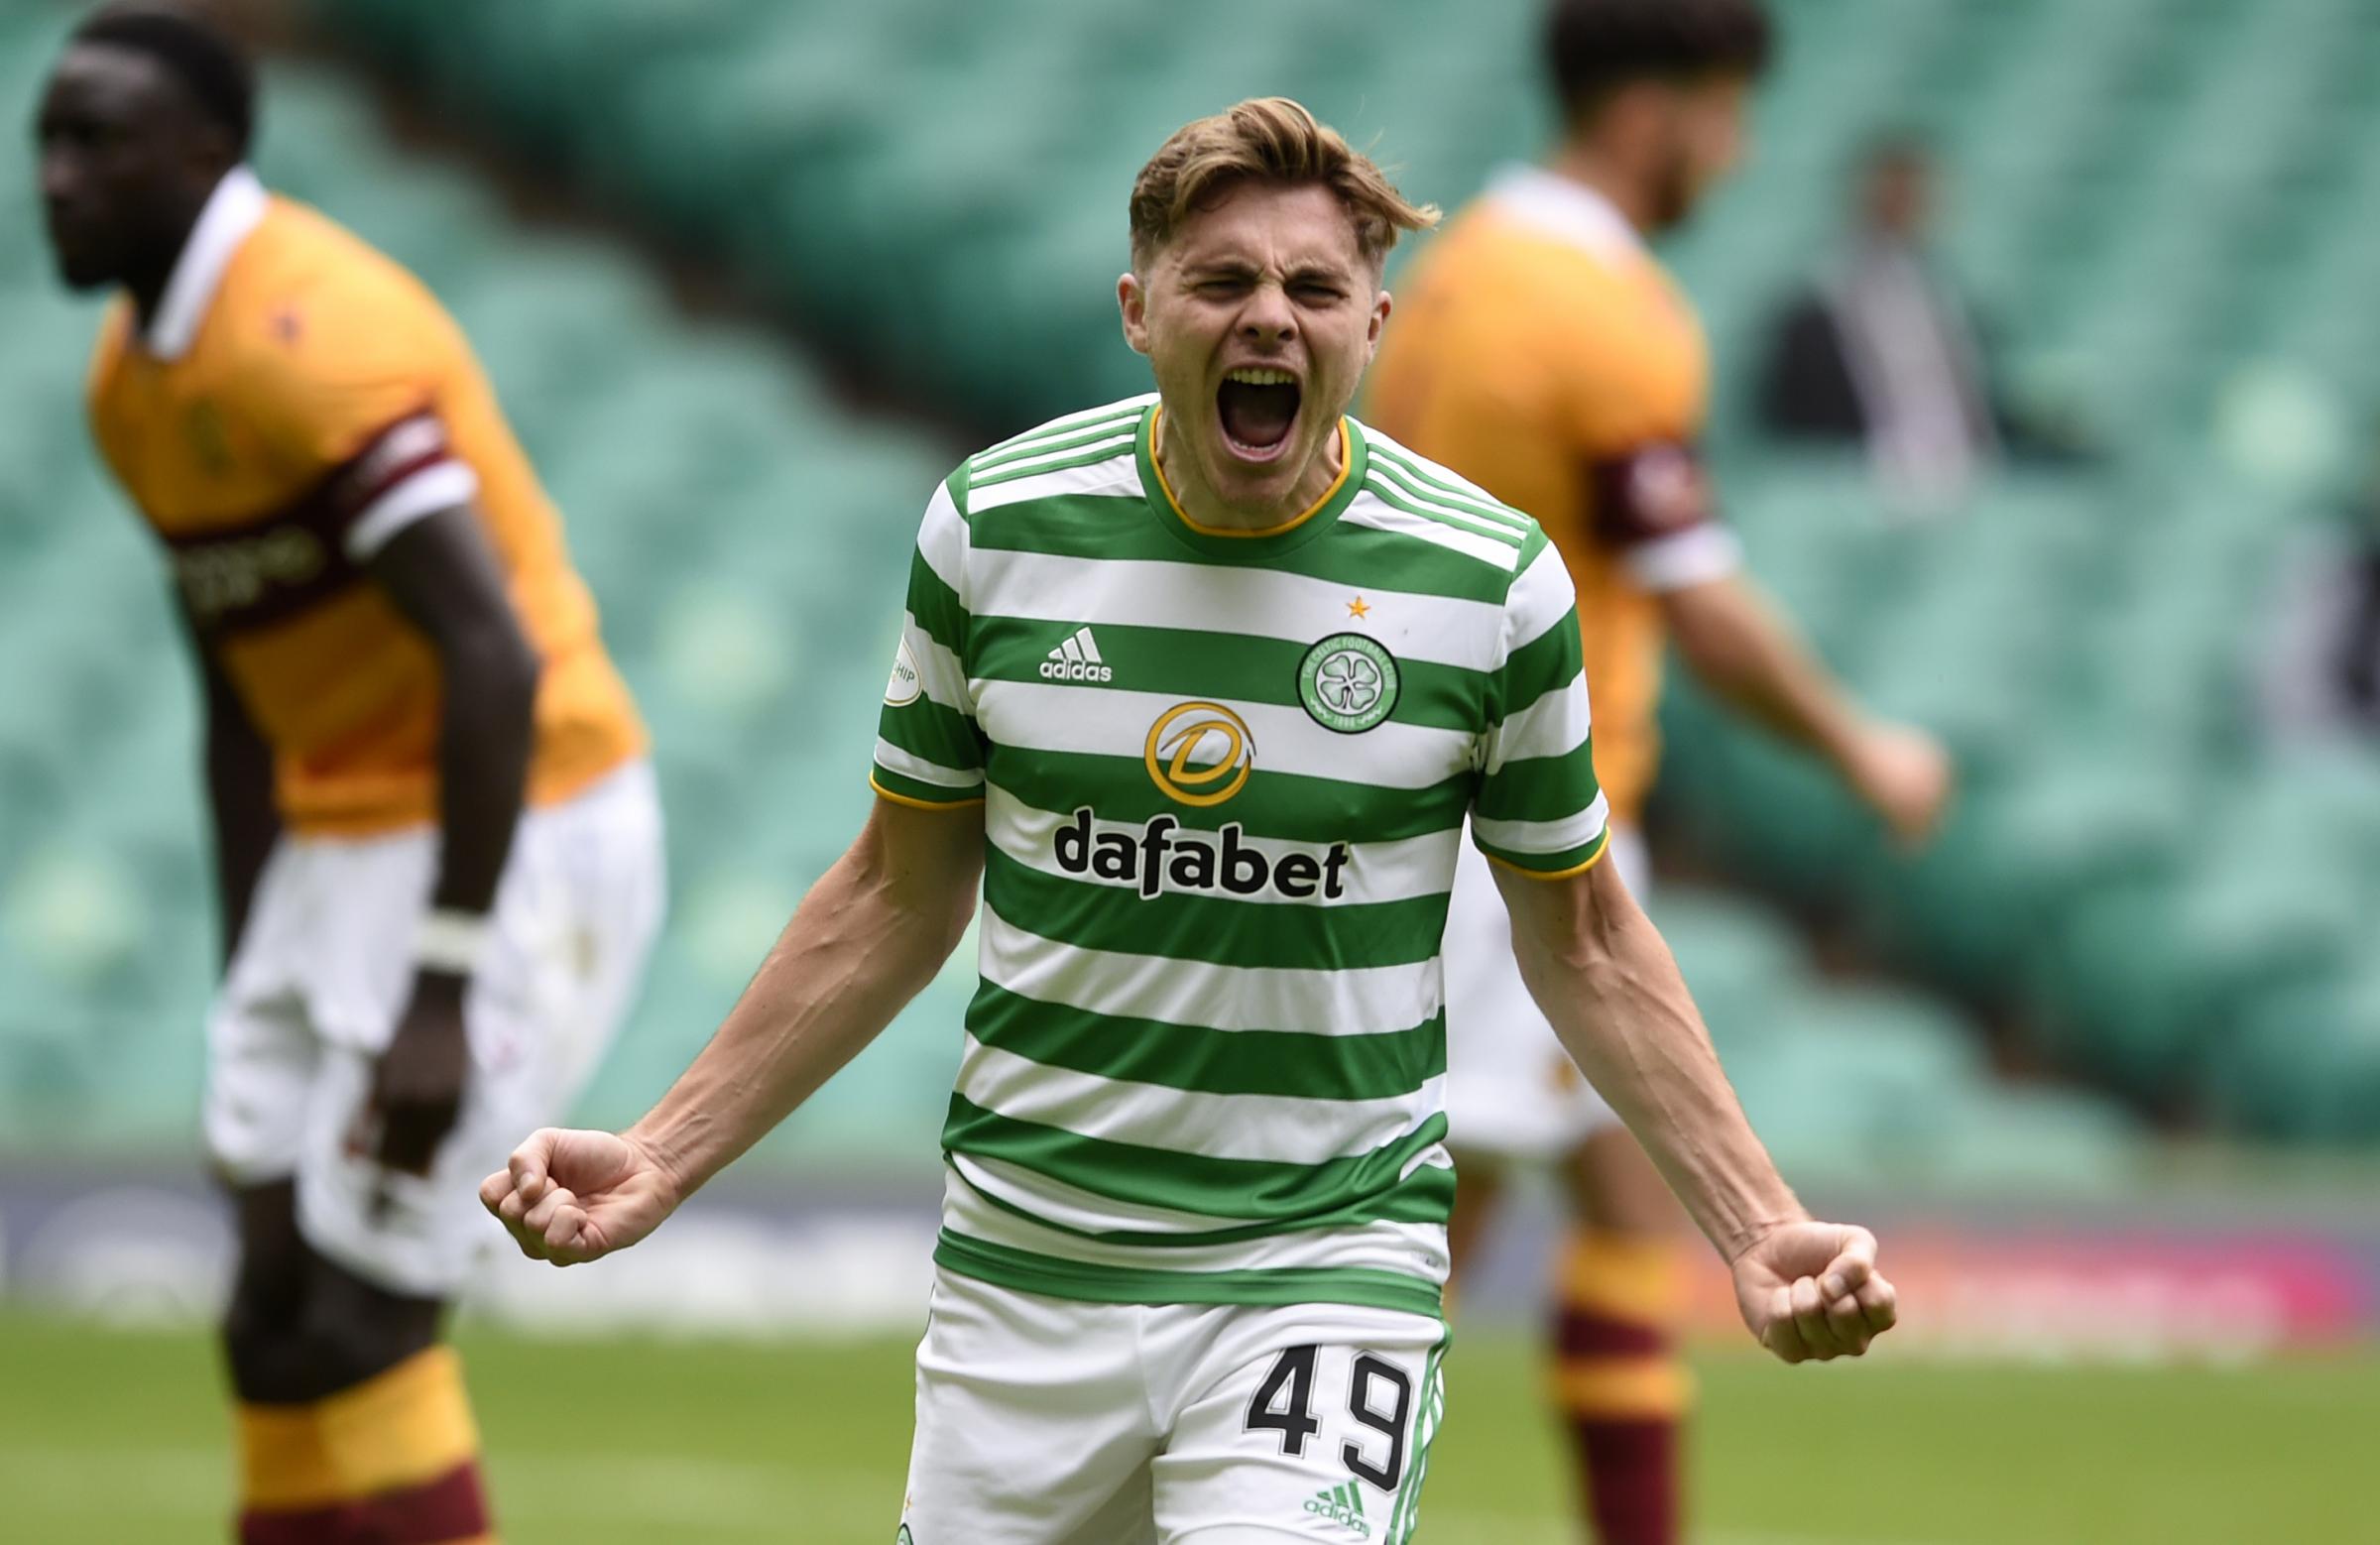 Celtic 3 Motherwell 0 as it happened: Neil Lennon's side bounce back from Champions League defeat with comfortable win